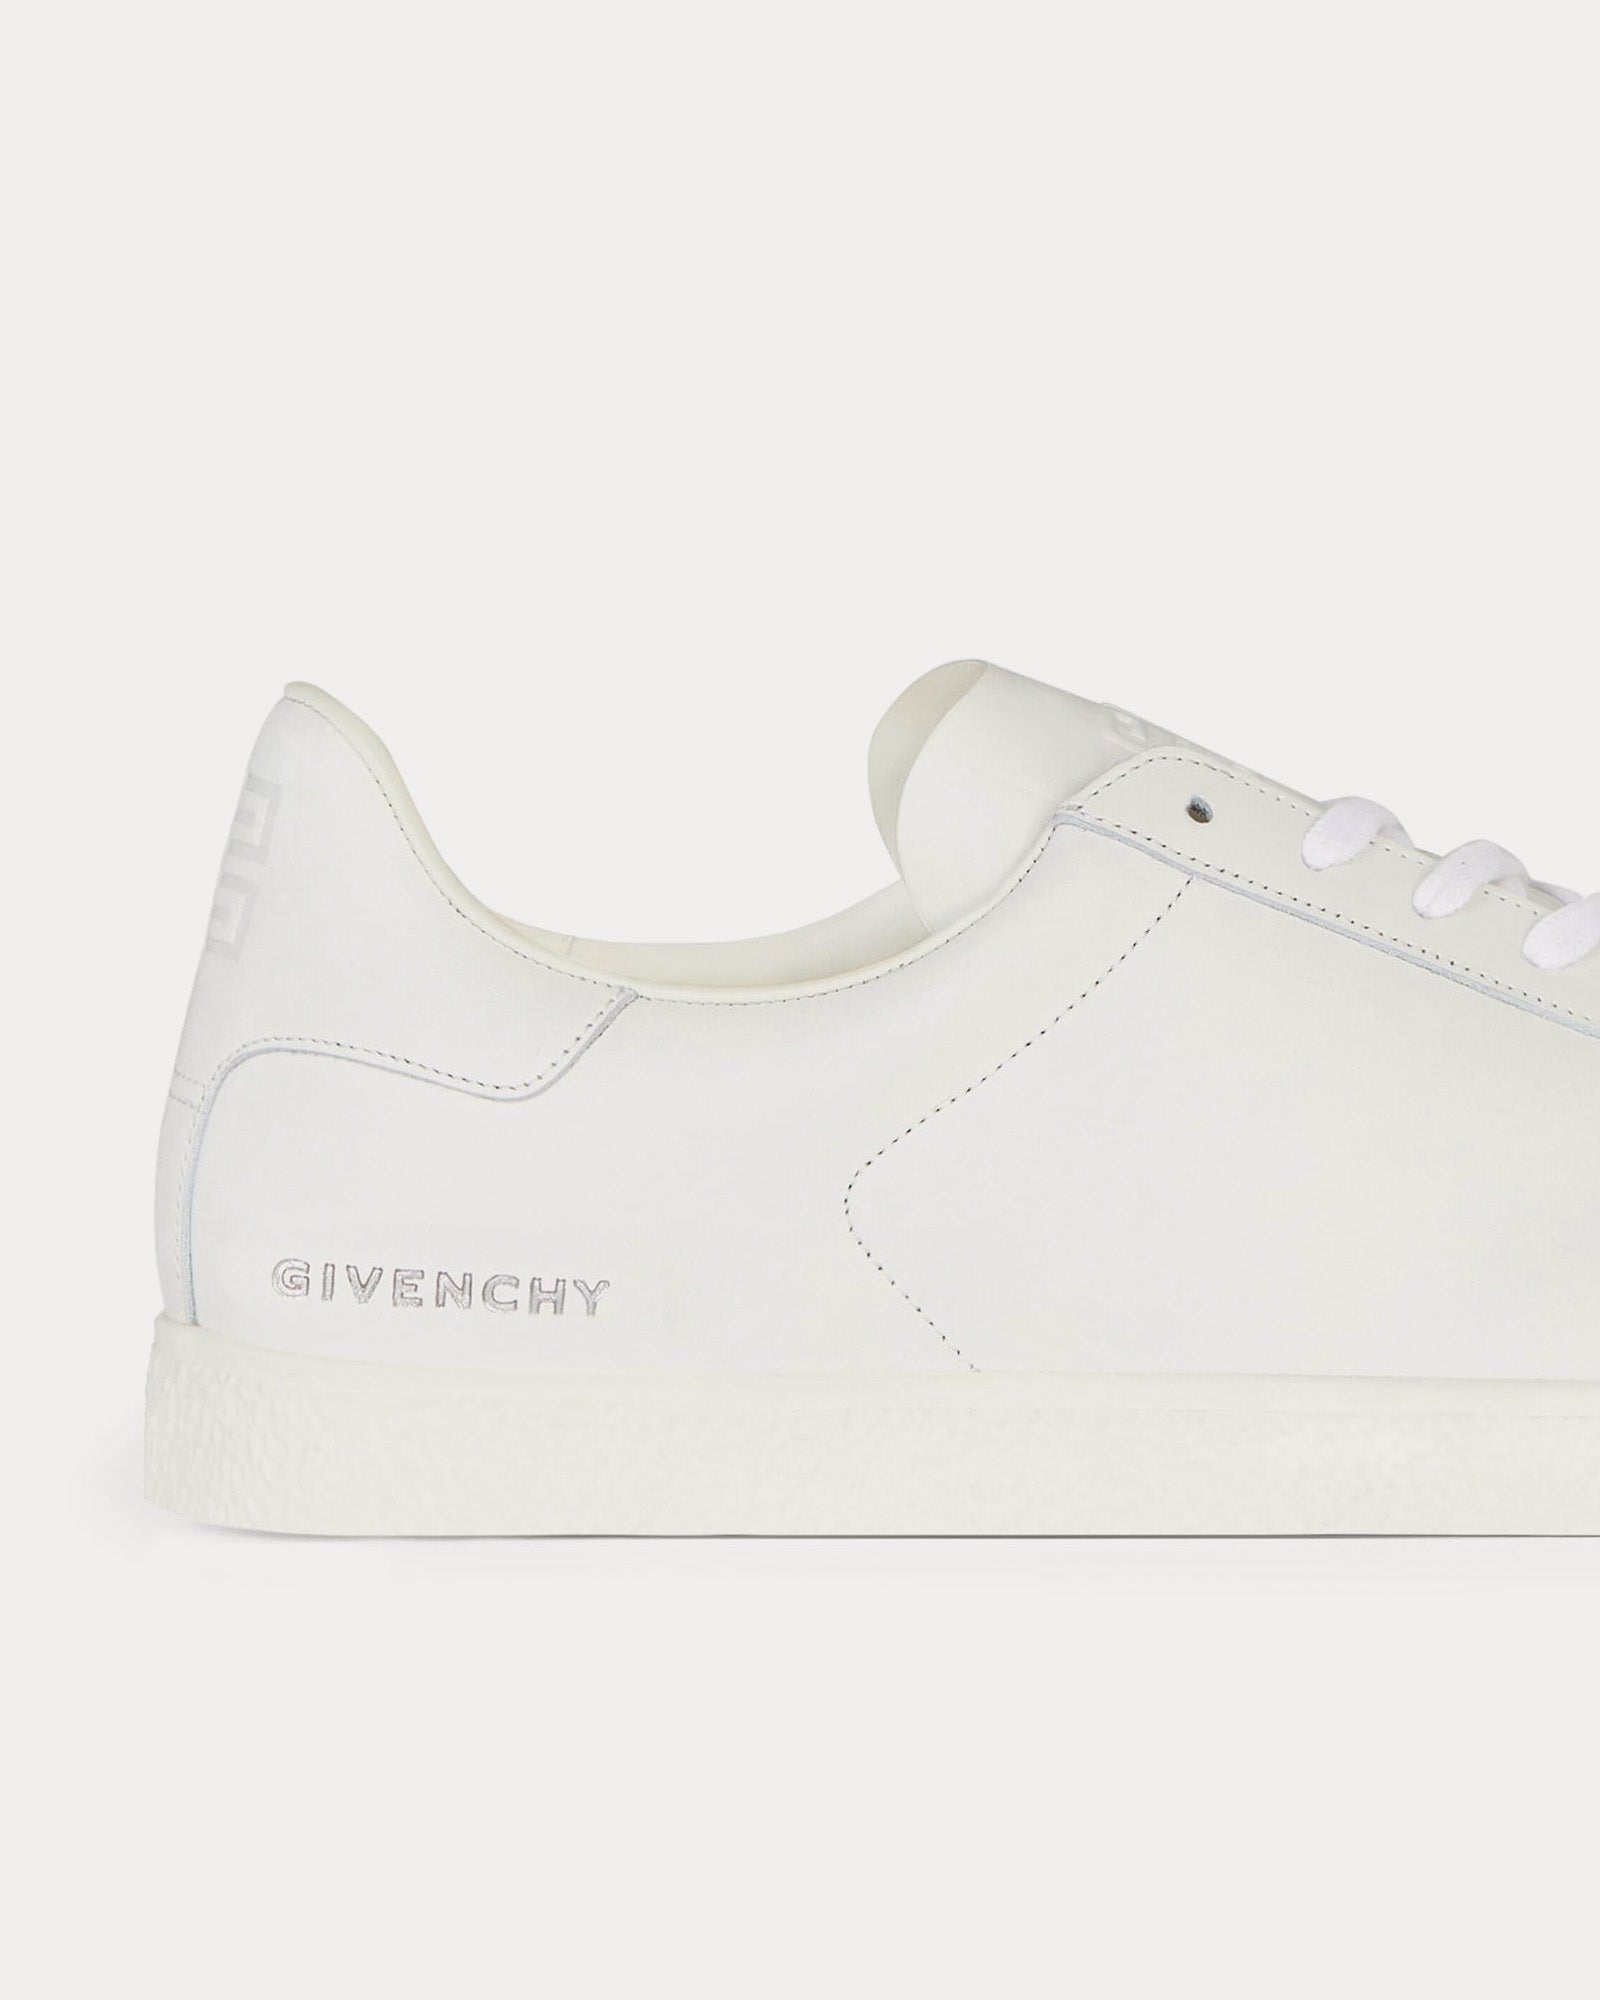 Givenchy - Town Leather White Low Top Sneakers